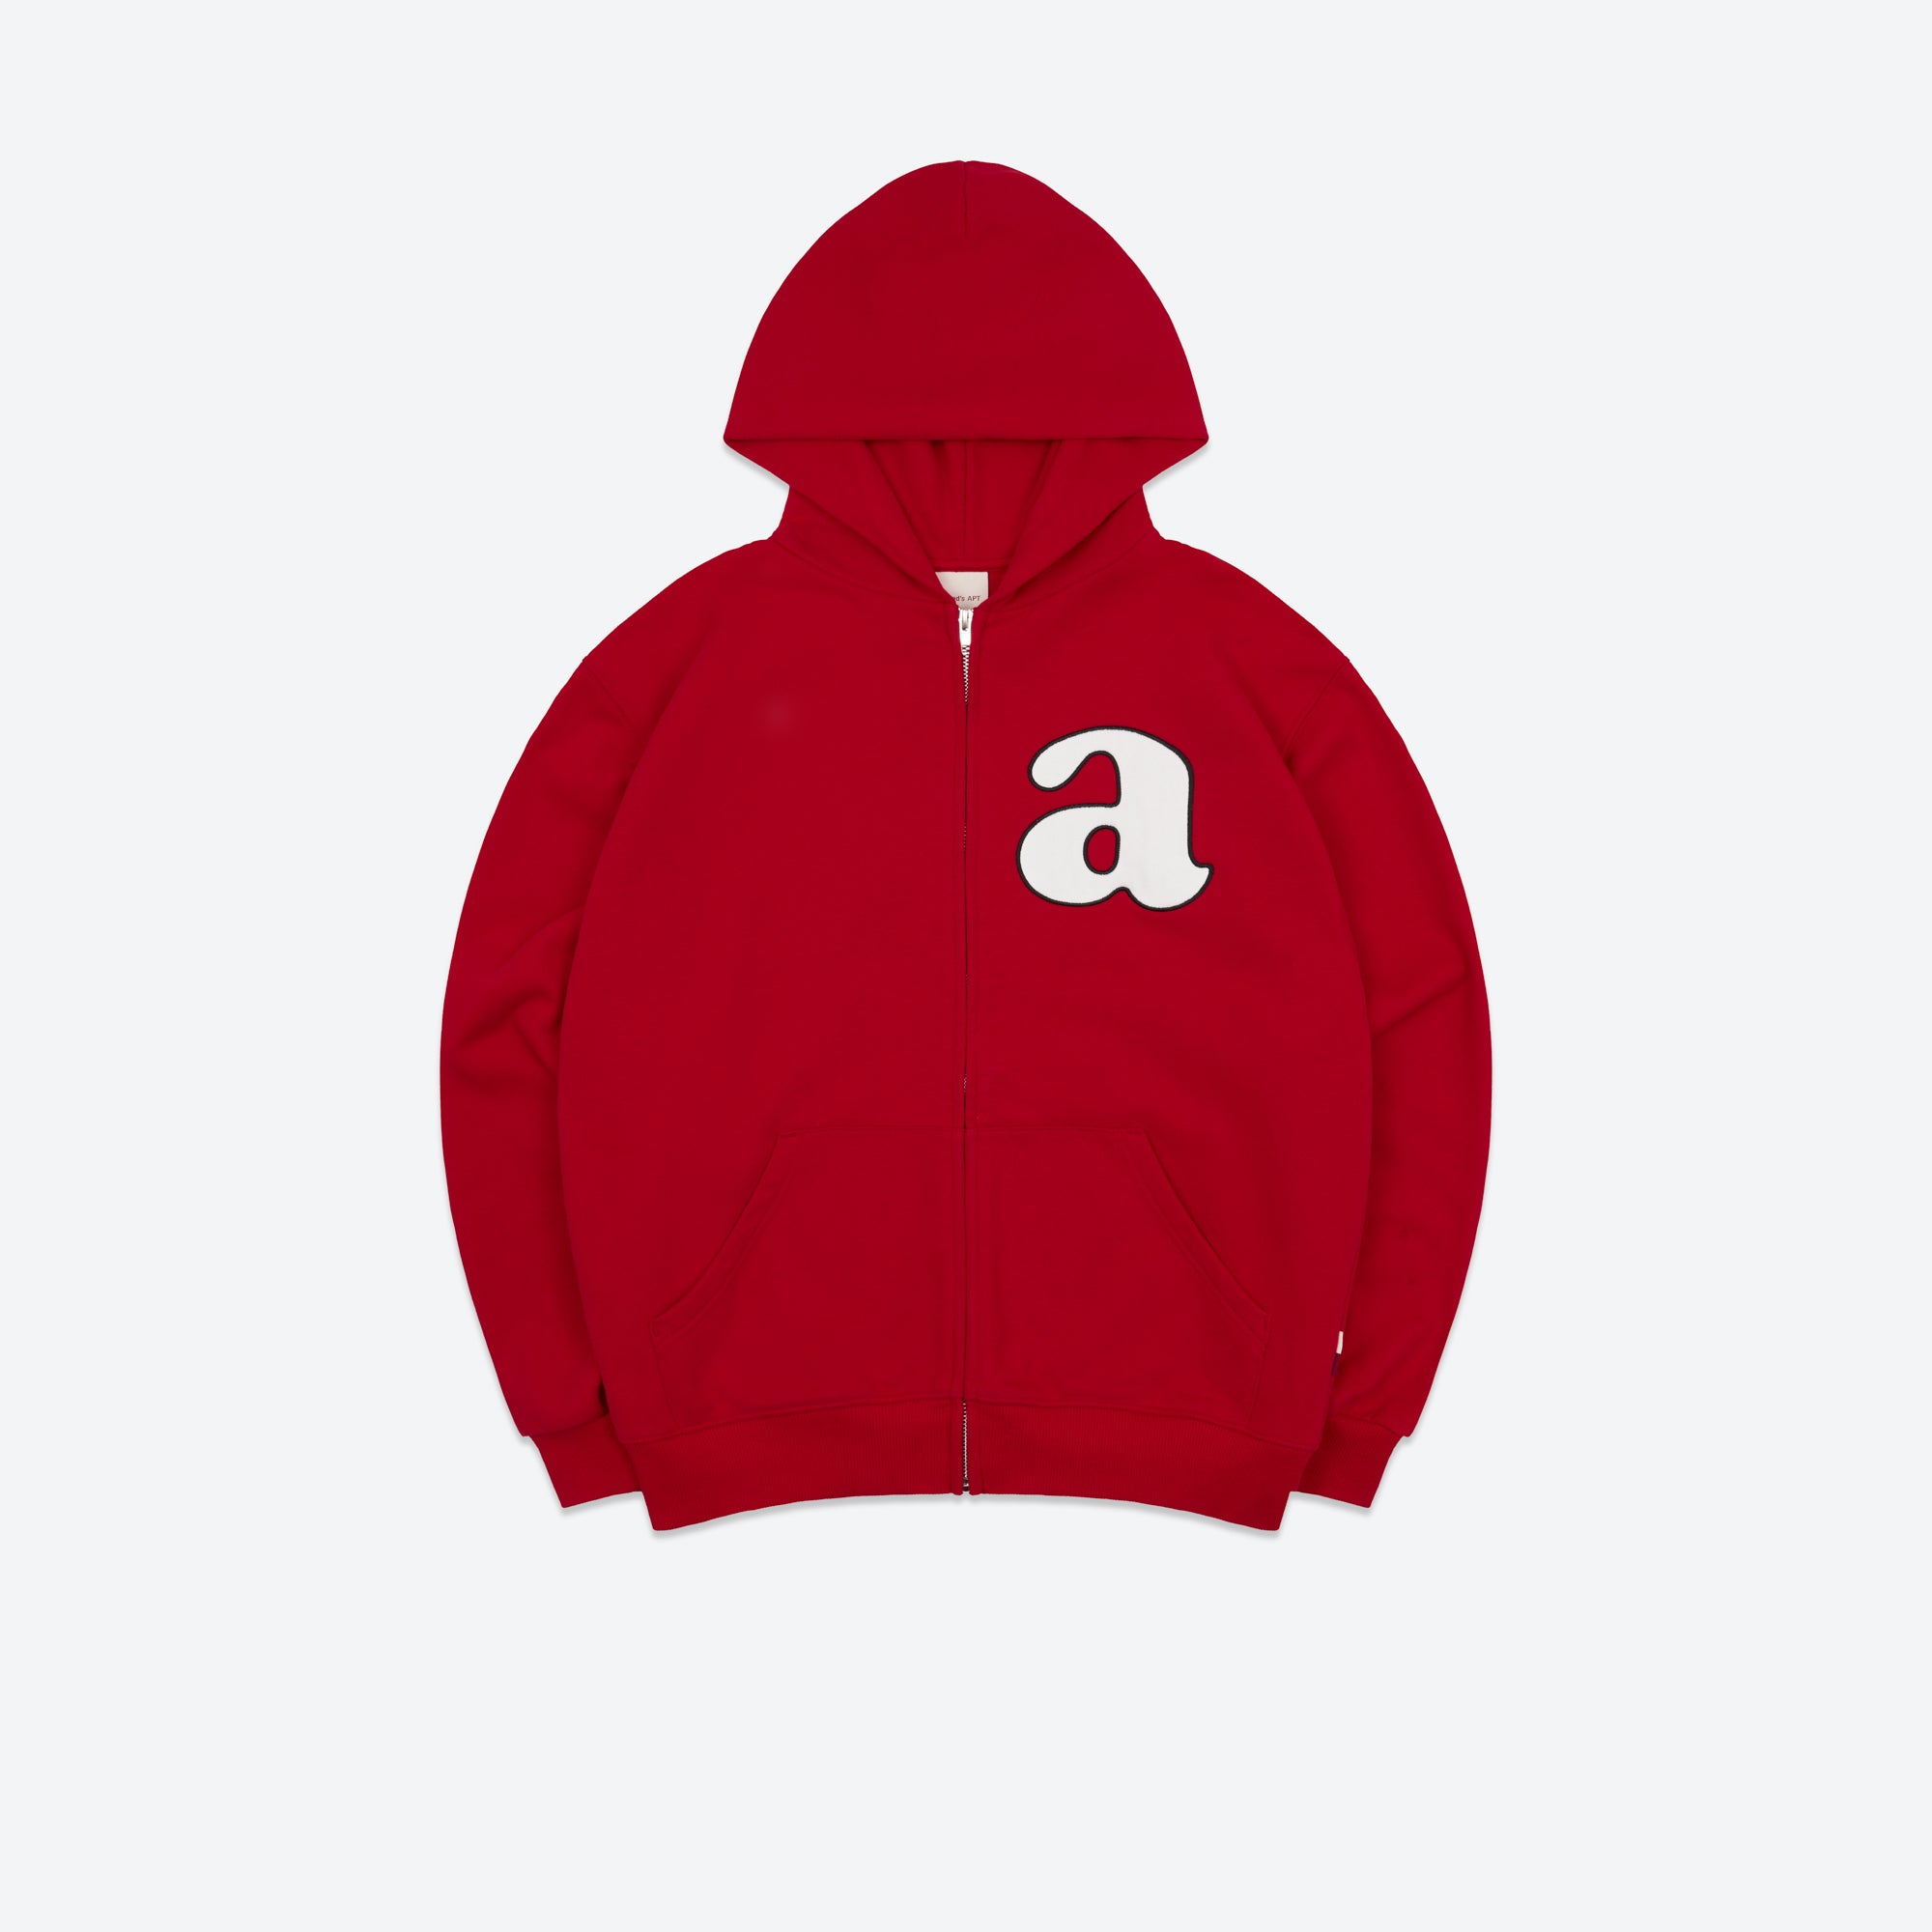 Alfred's Apartment - Stamp Zip Hood - Red